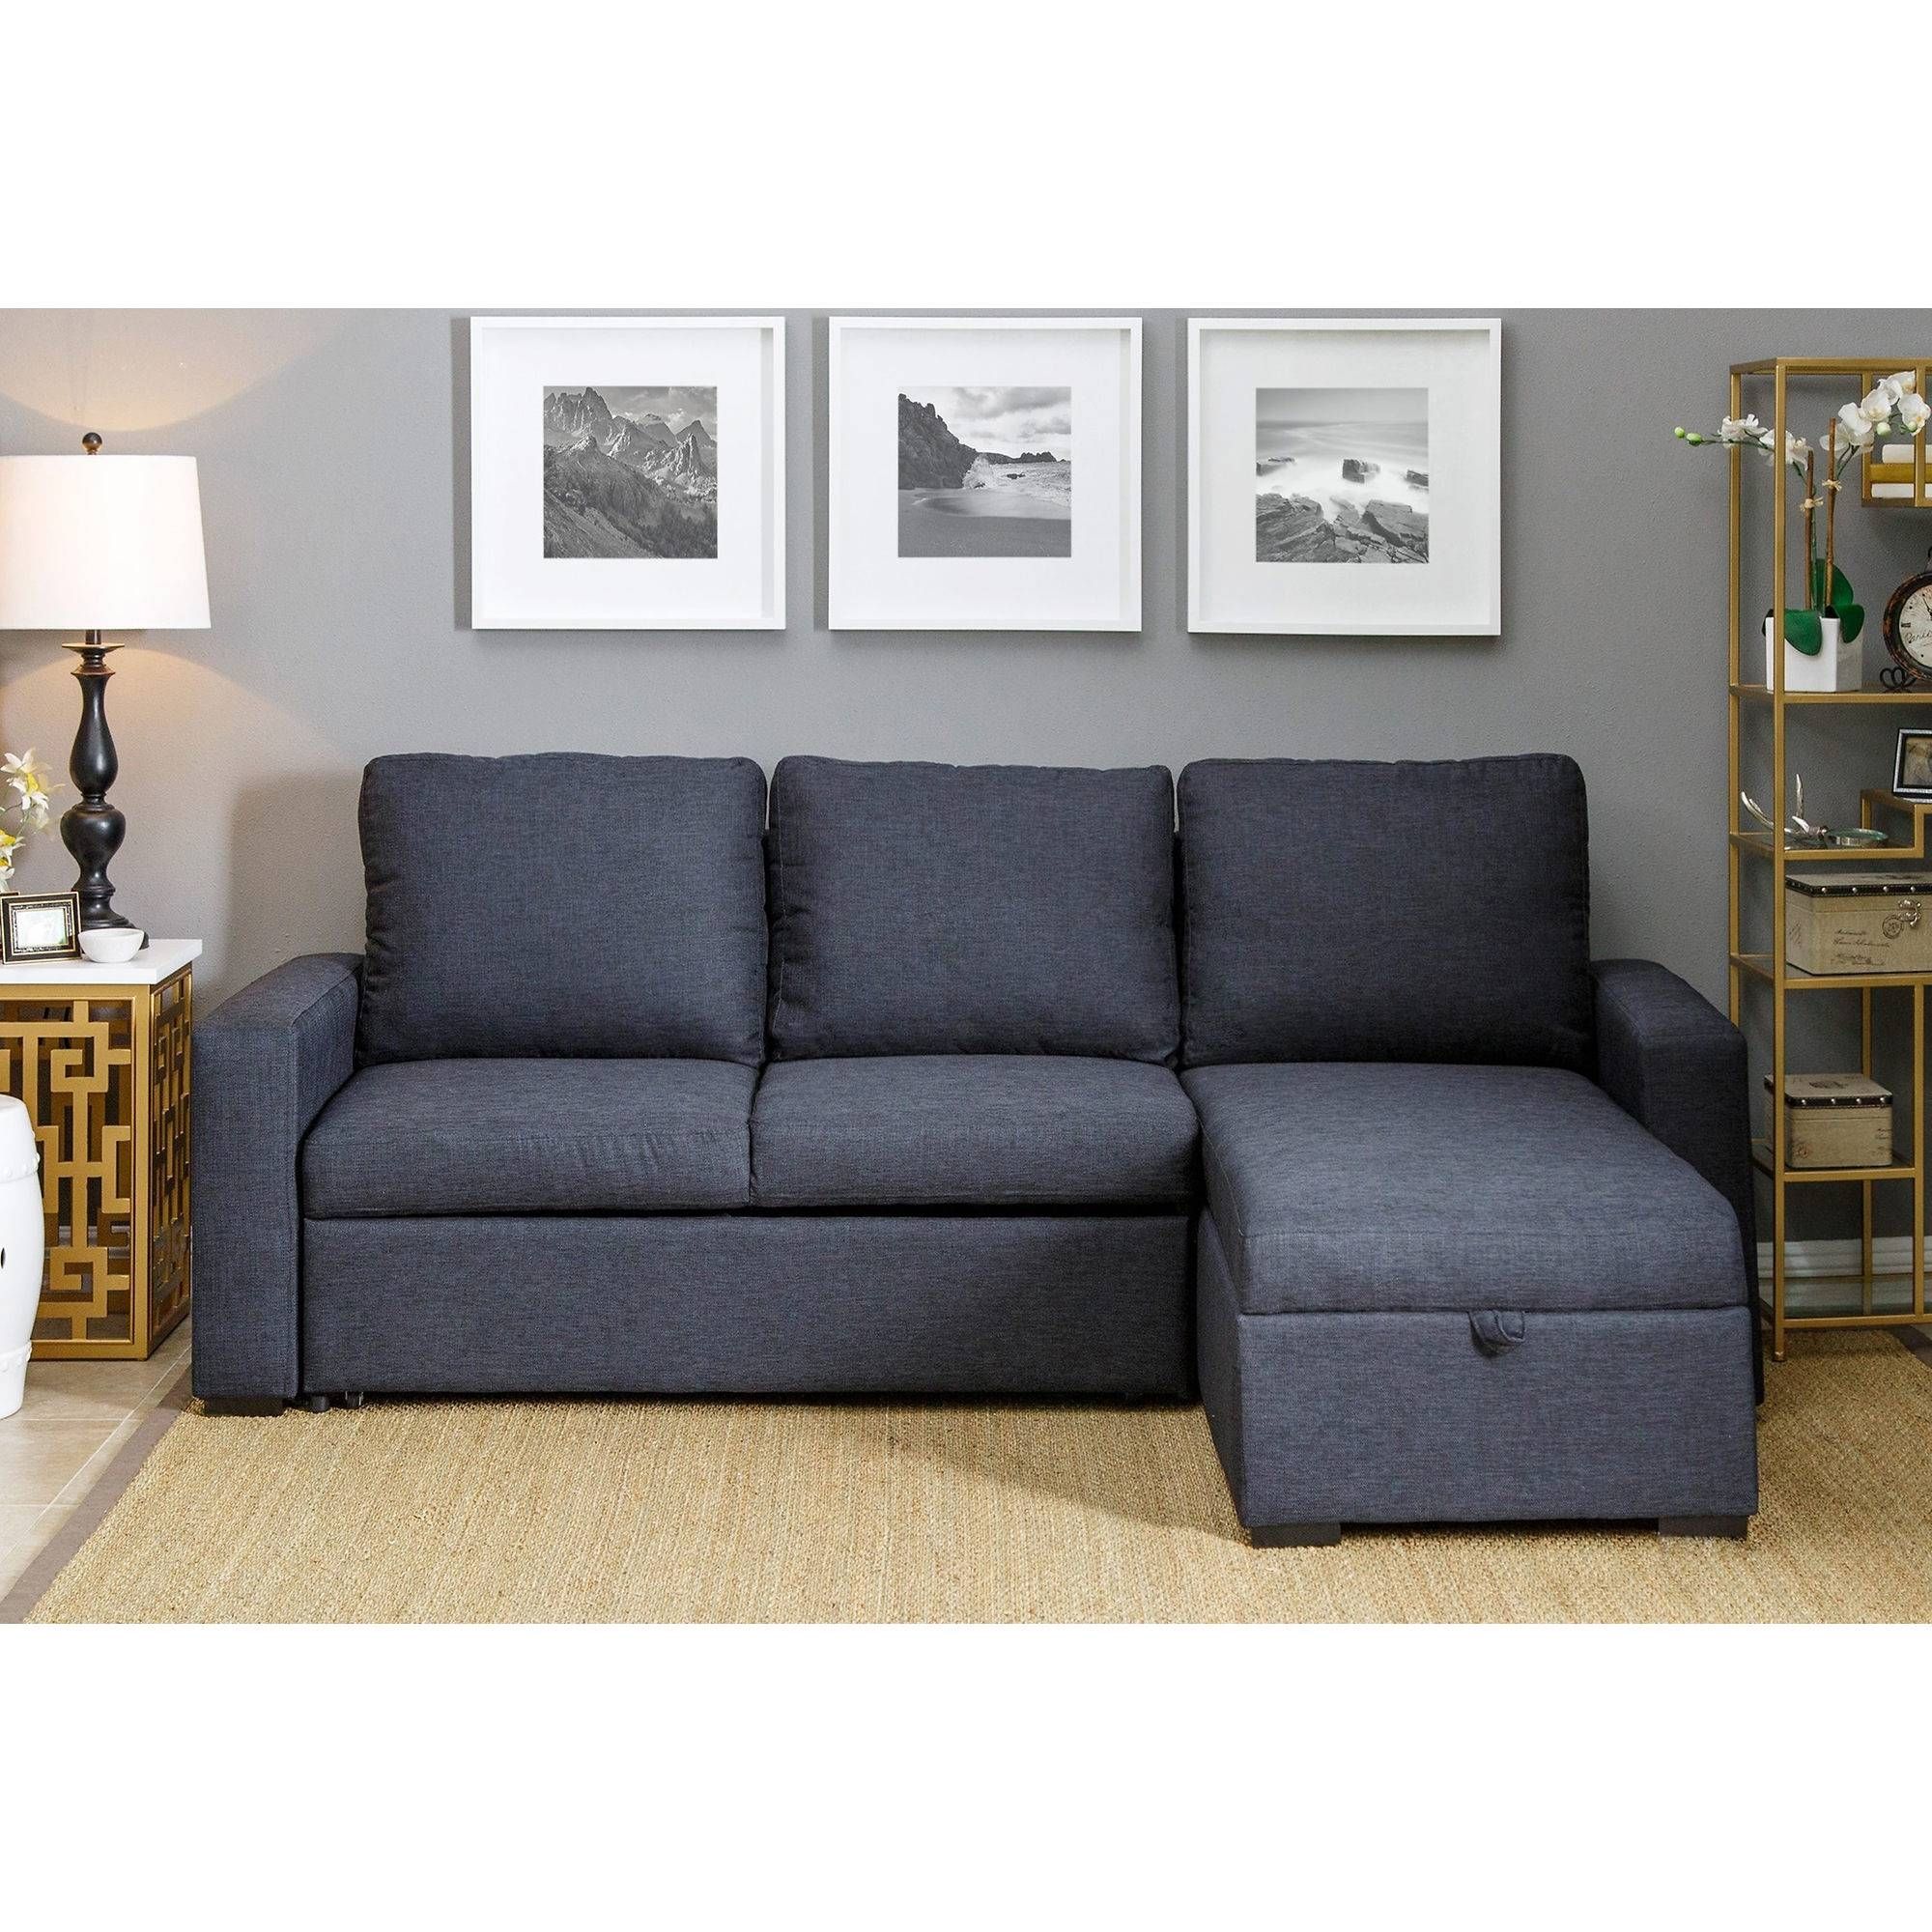 Cheap Sectional Sofas With Ottoman (View 4 of 30)